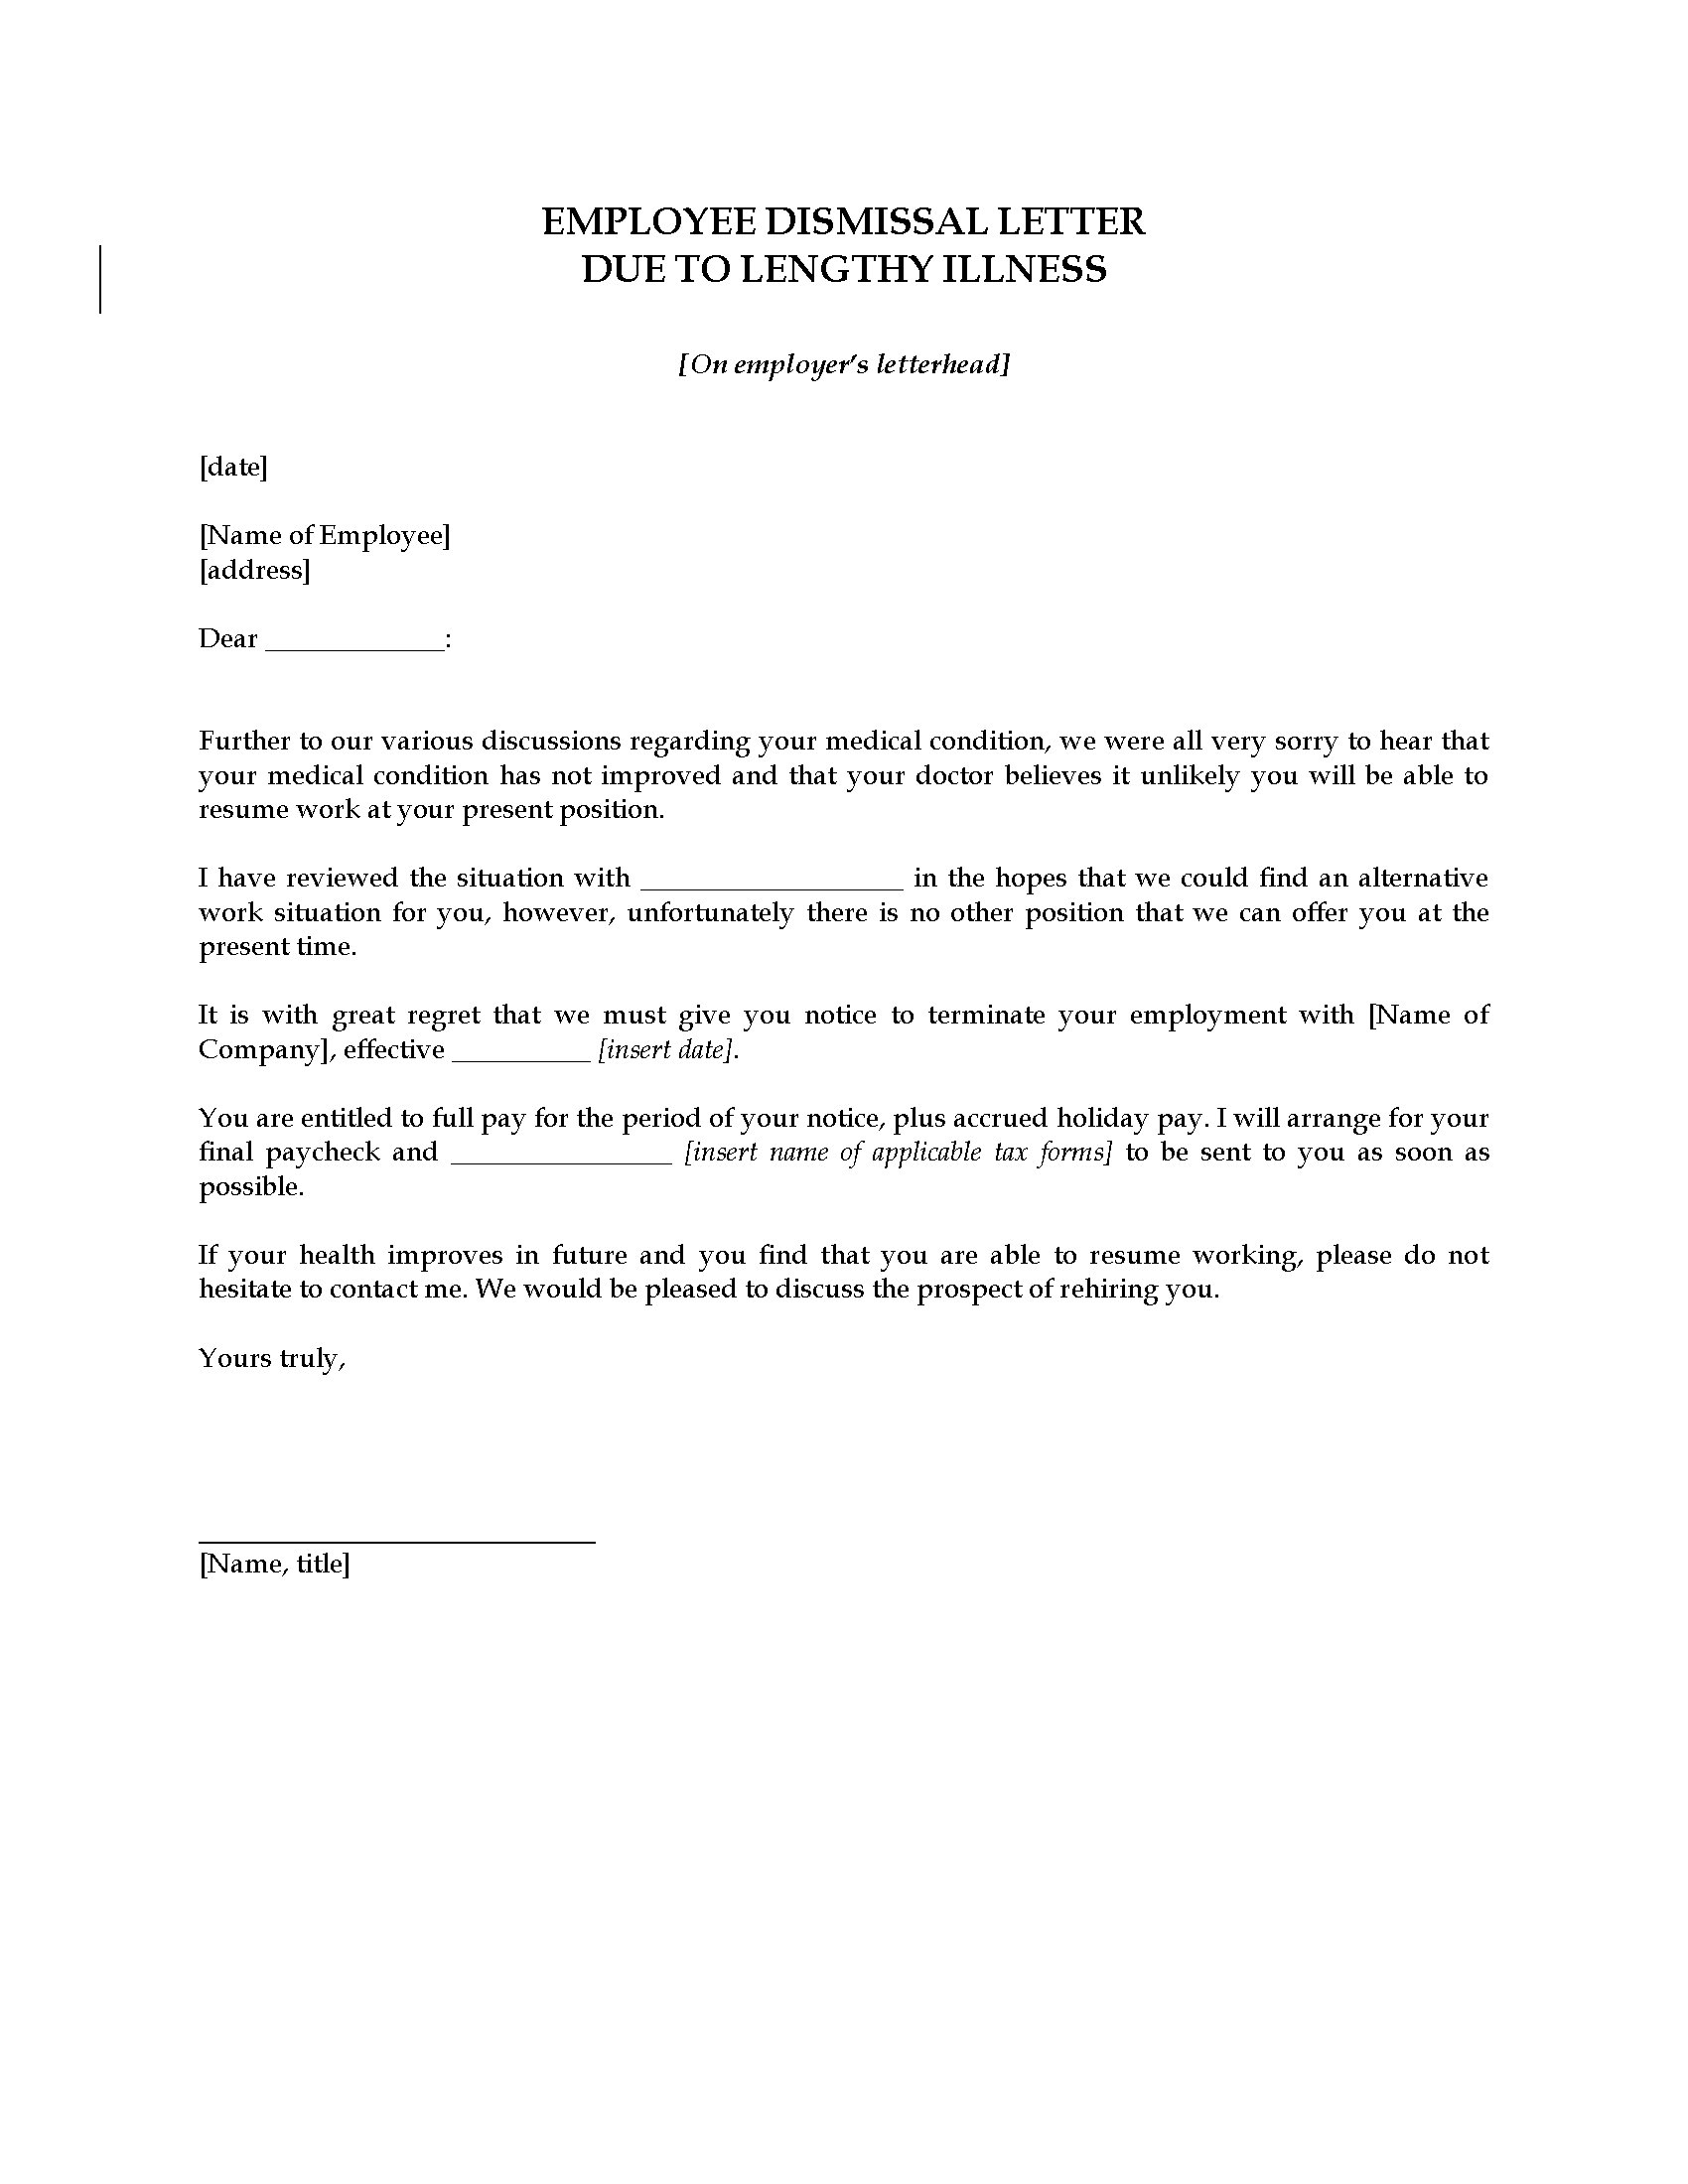 Employee Termination Letter Due to Lengthy Illness | Legal ...